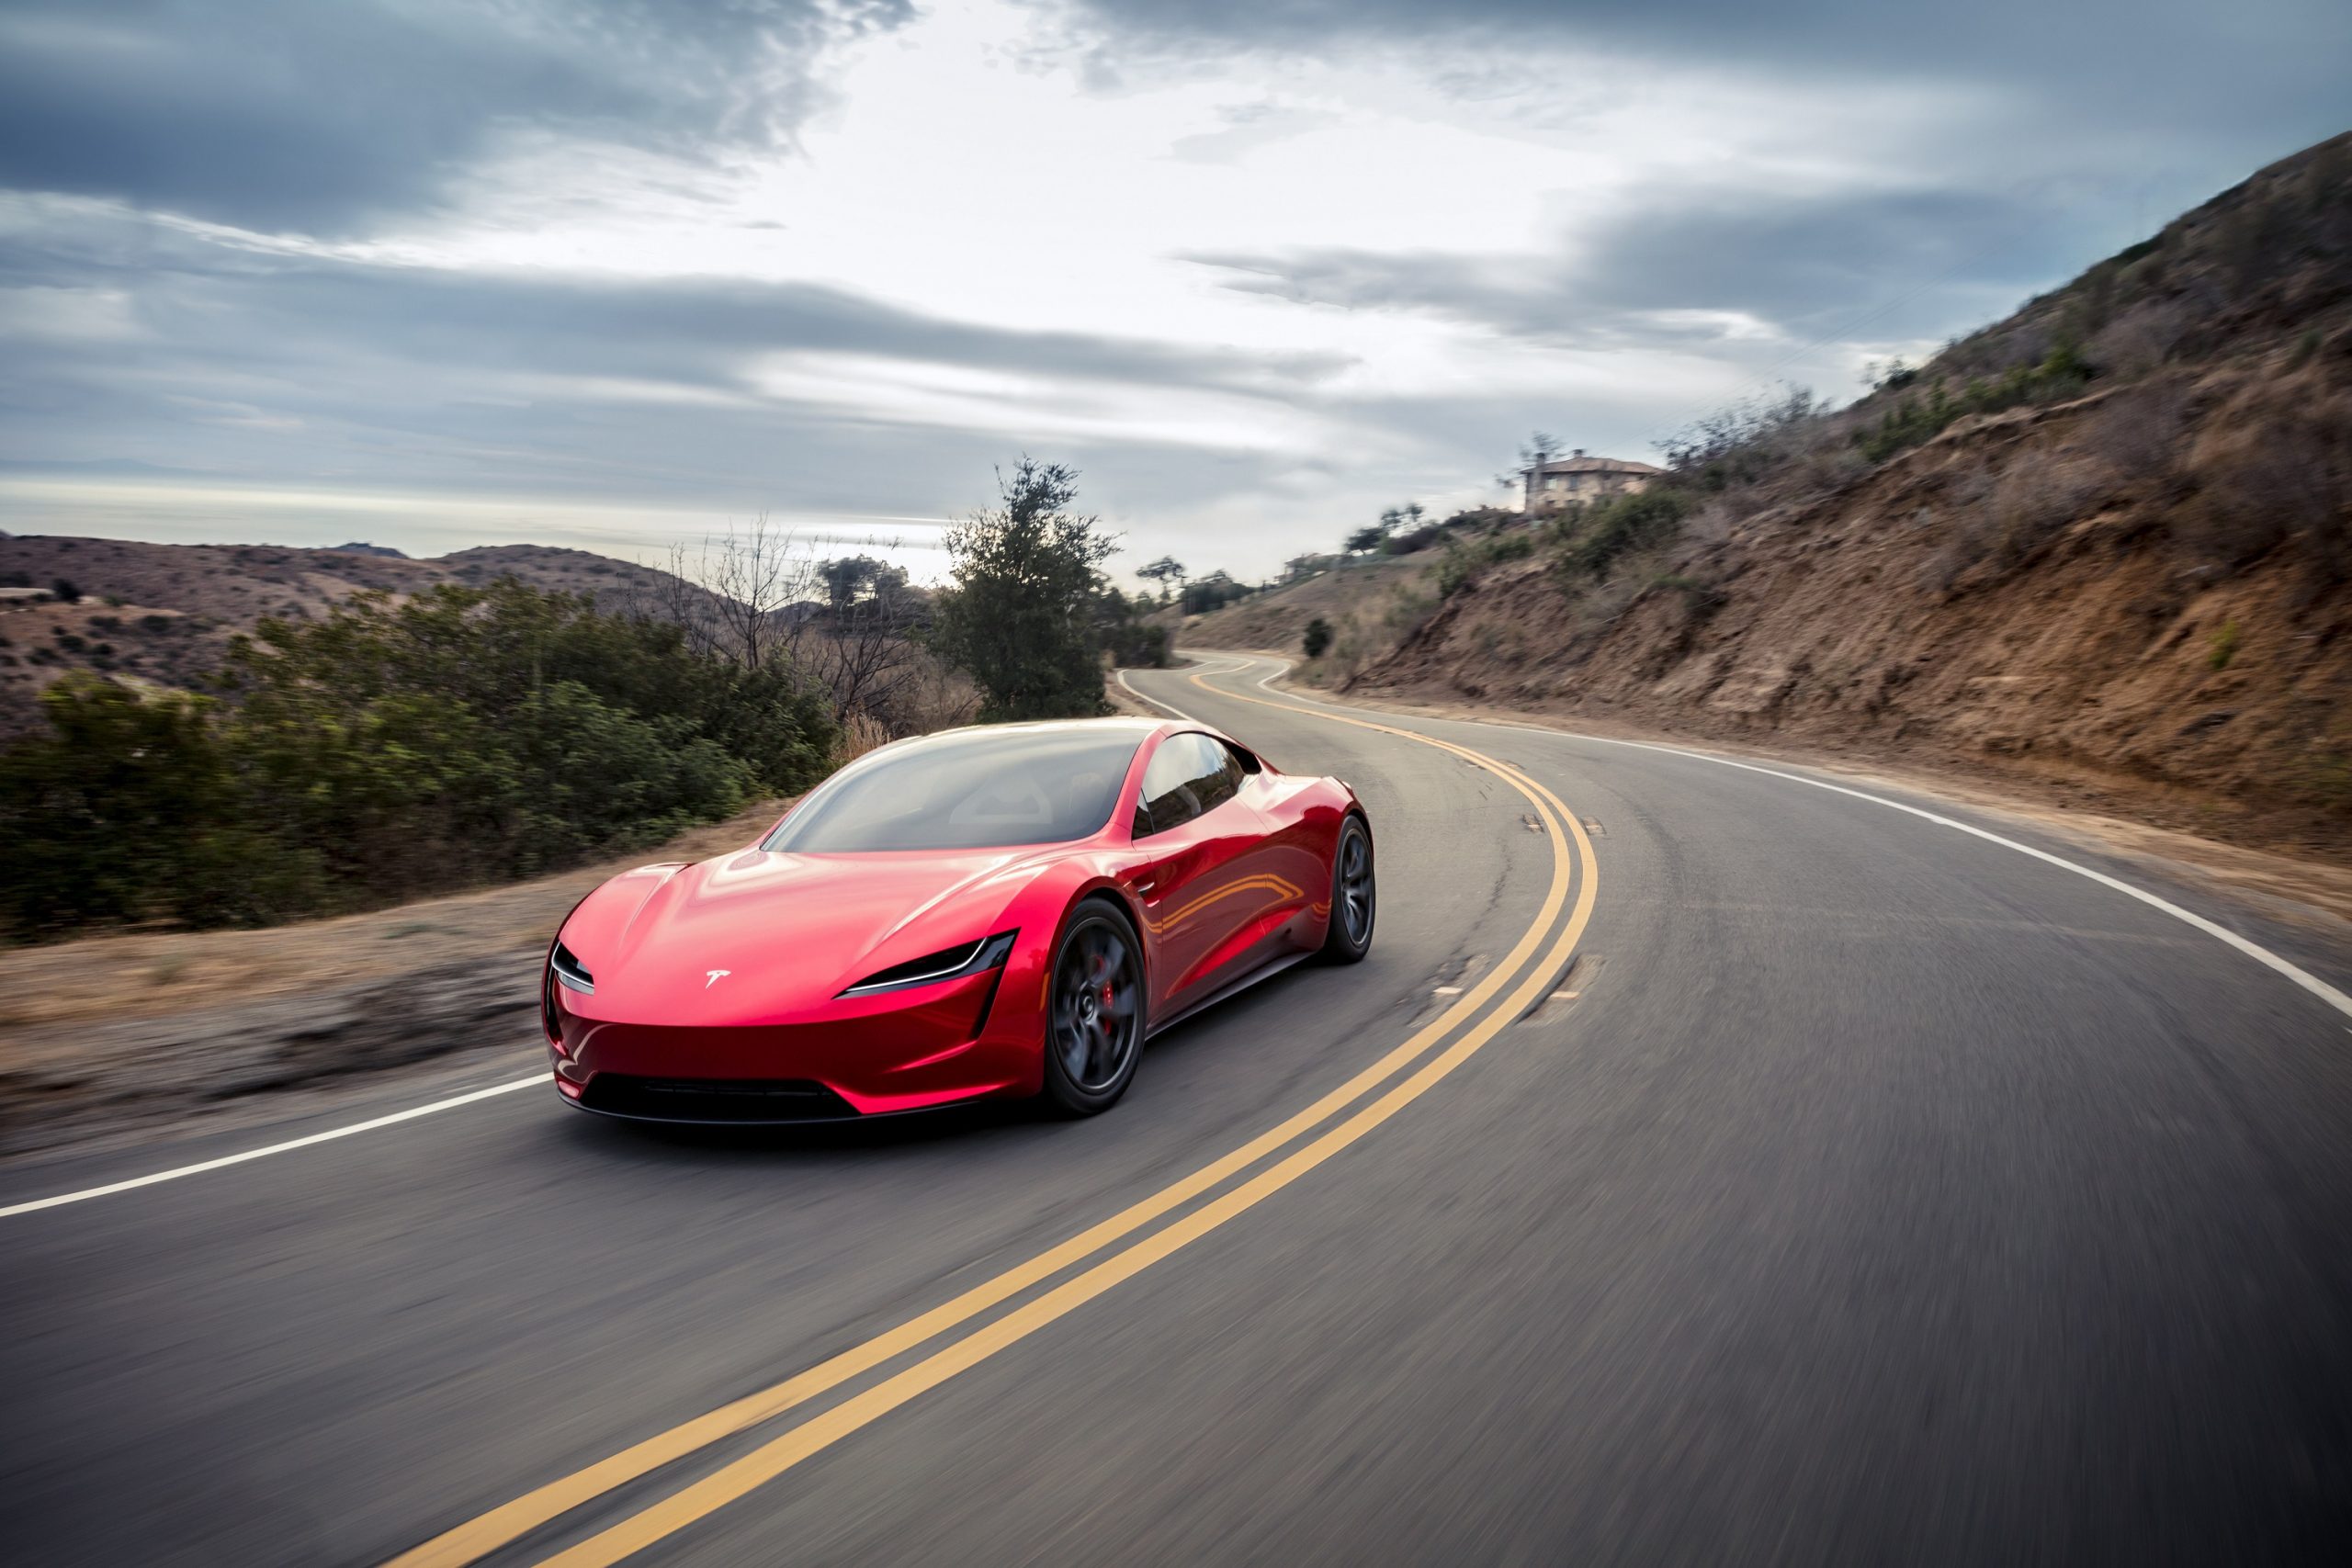 A rendering of the Tesla Roadster on a canyon road in California